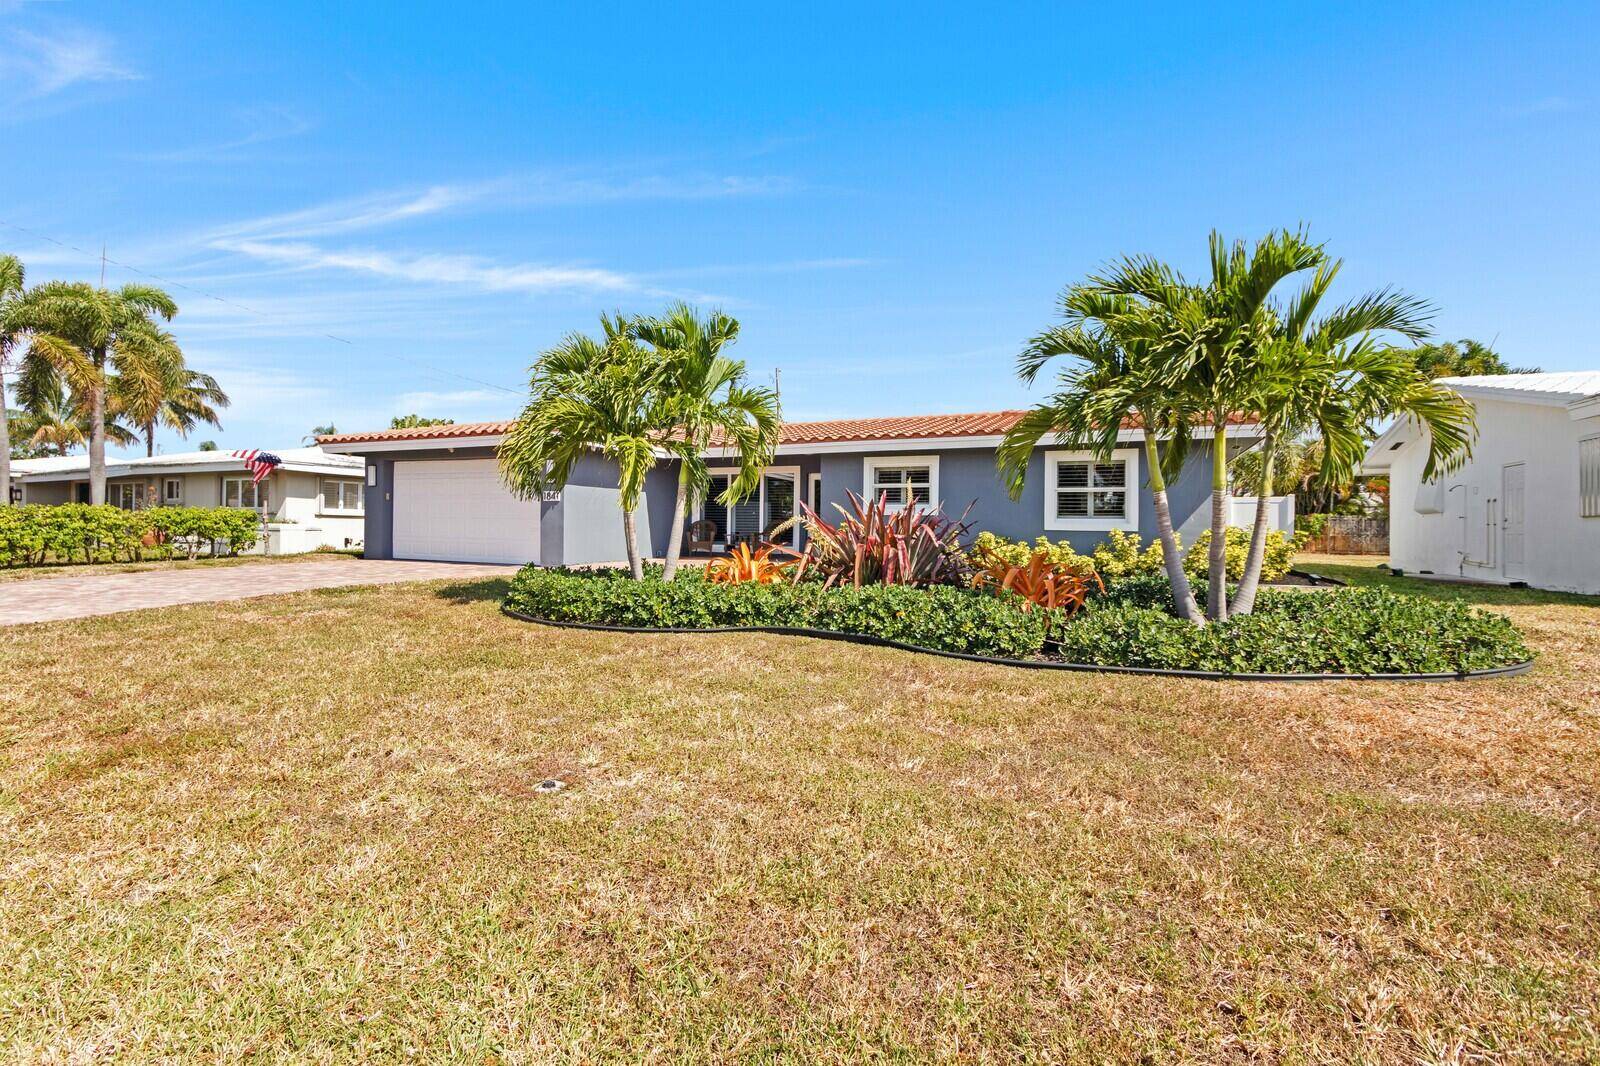 Stunning 3 bedroom home in ACCLAIMED CORAL HEIGHTS.